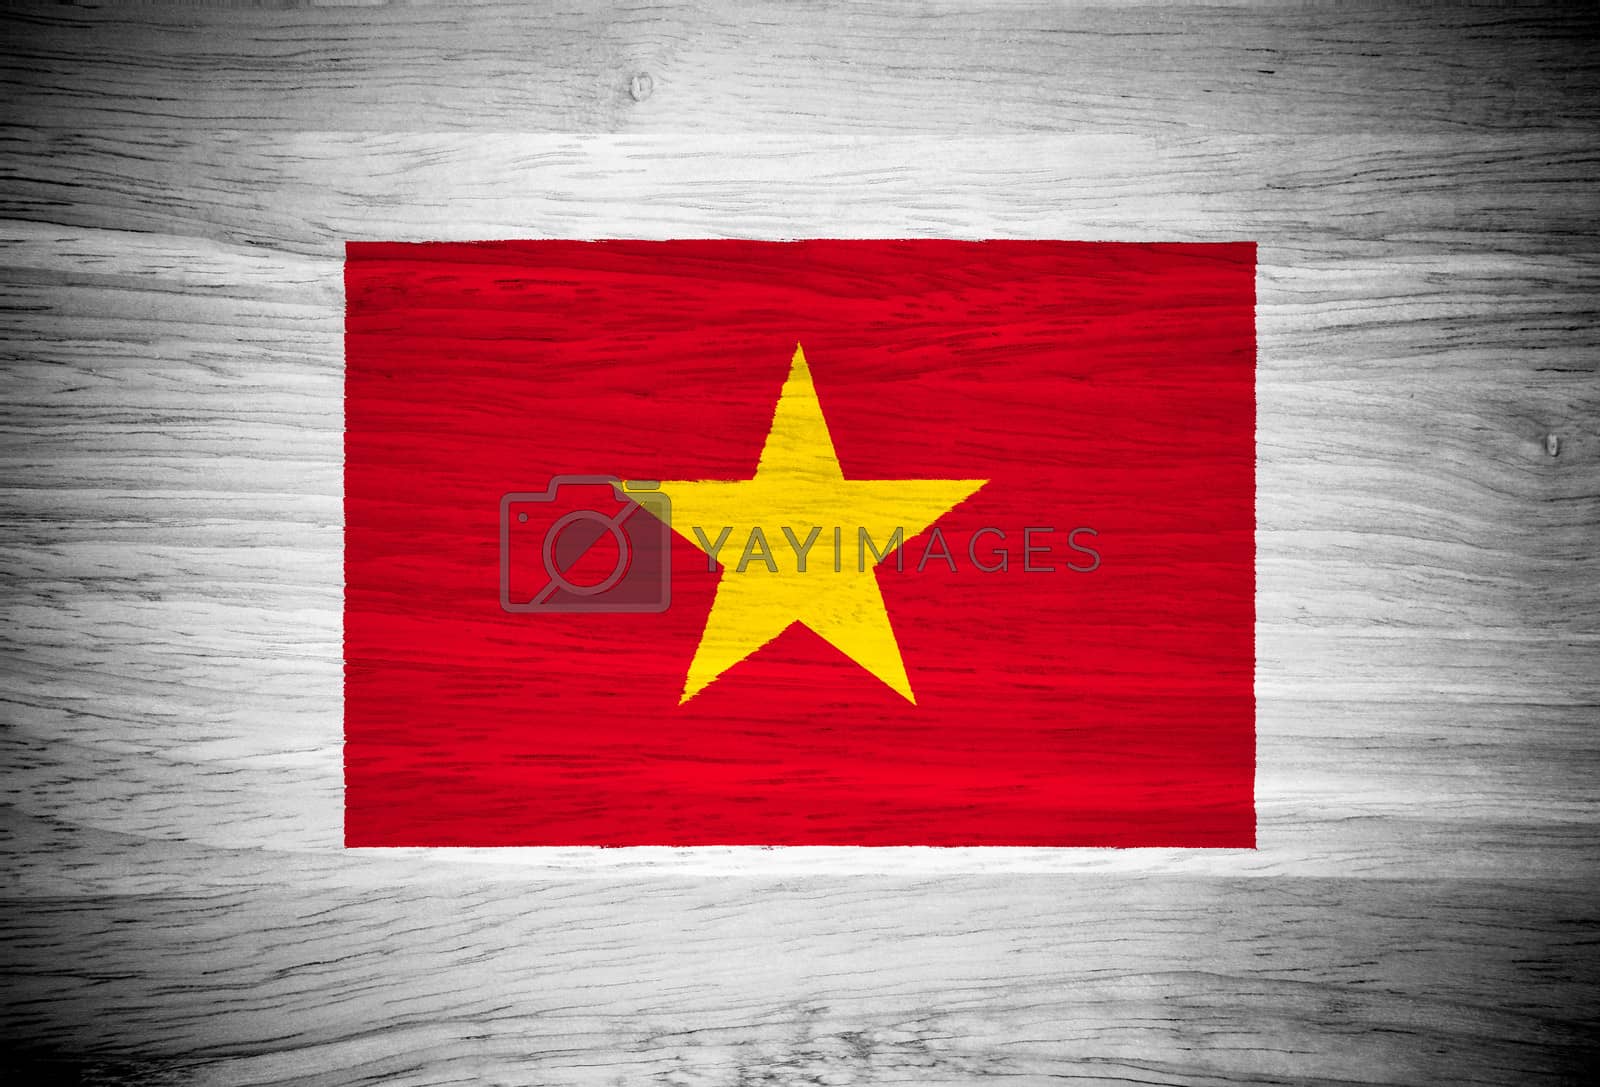 Royalty free image of Vietnam flag on wood texture by pinkblue